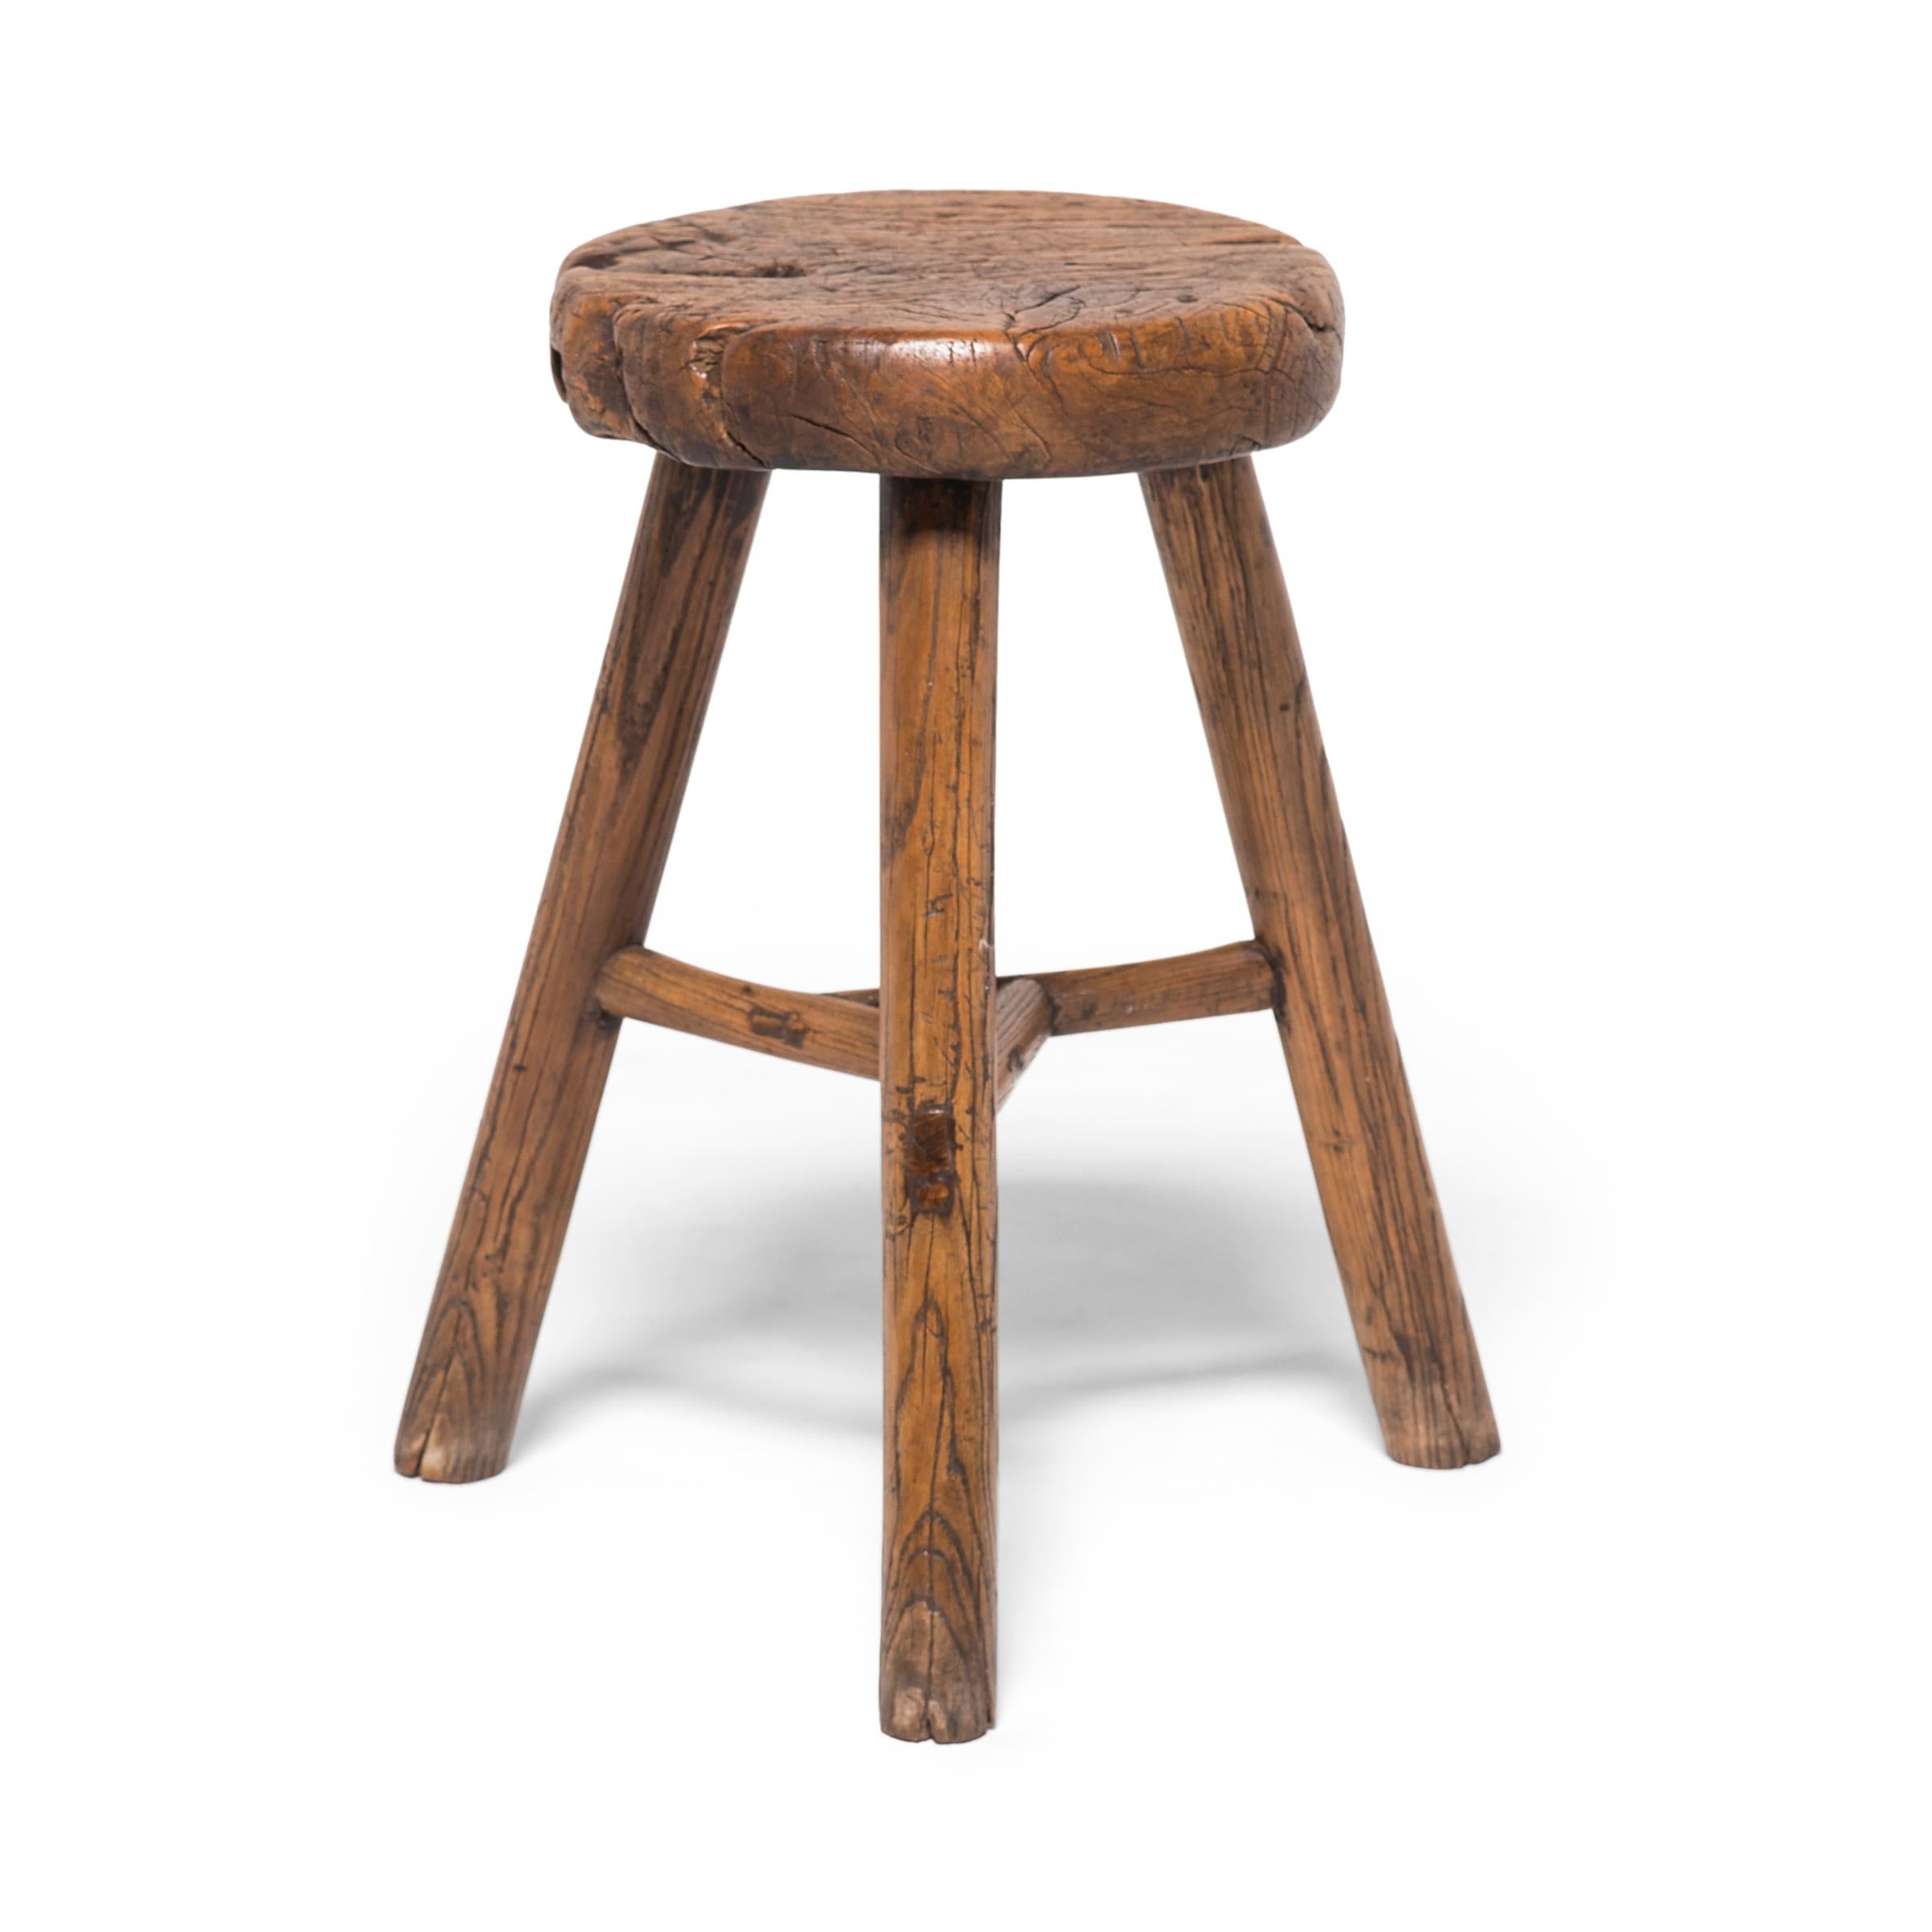 This 19th century stool from China's Shanxi province charms with its simple form and fantastic texture. Its round seat beautifully showcases the expressive grain of northern Elmwood and embraces the notion of 